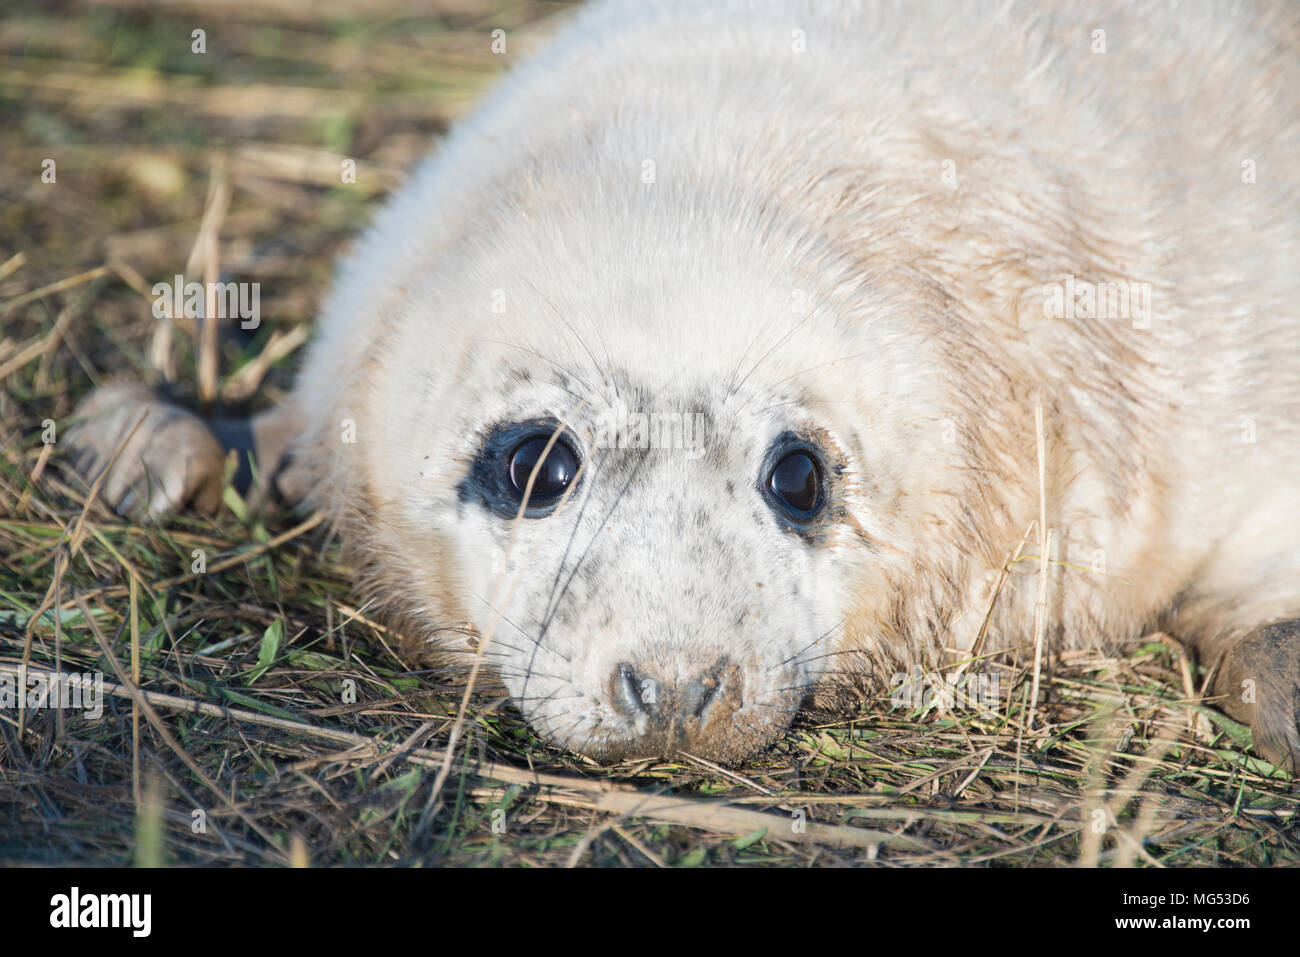 Donna Nook, Lincolnshire, UK – Nov 16 : Close up on the face of a cute fluffy newborn baby grey seal pup lying in the grass 16 Nov 2016 at Donna Nook  Stock Photo